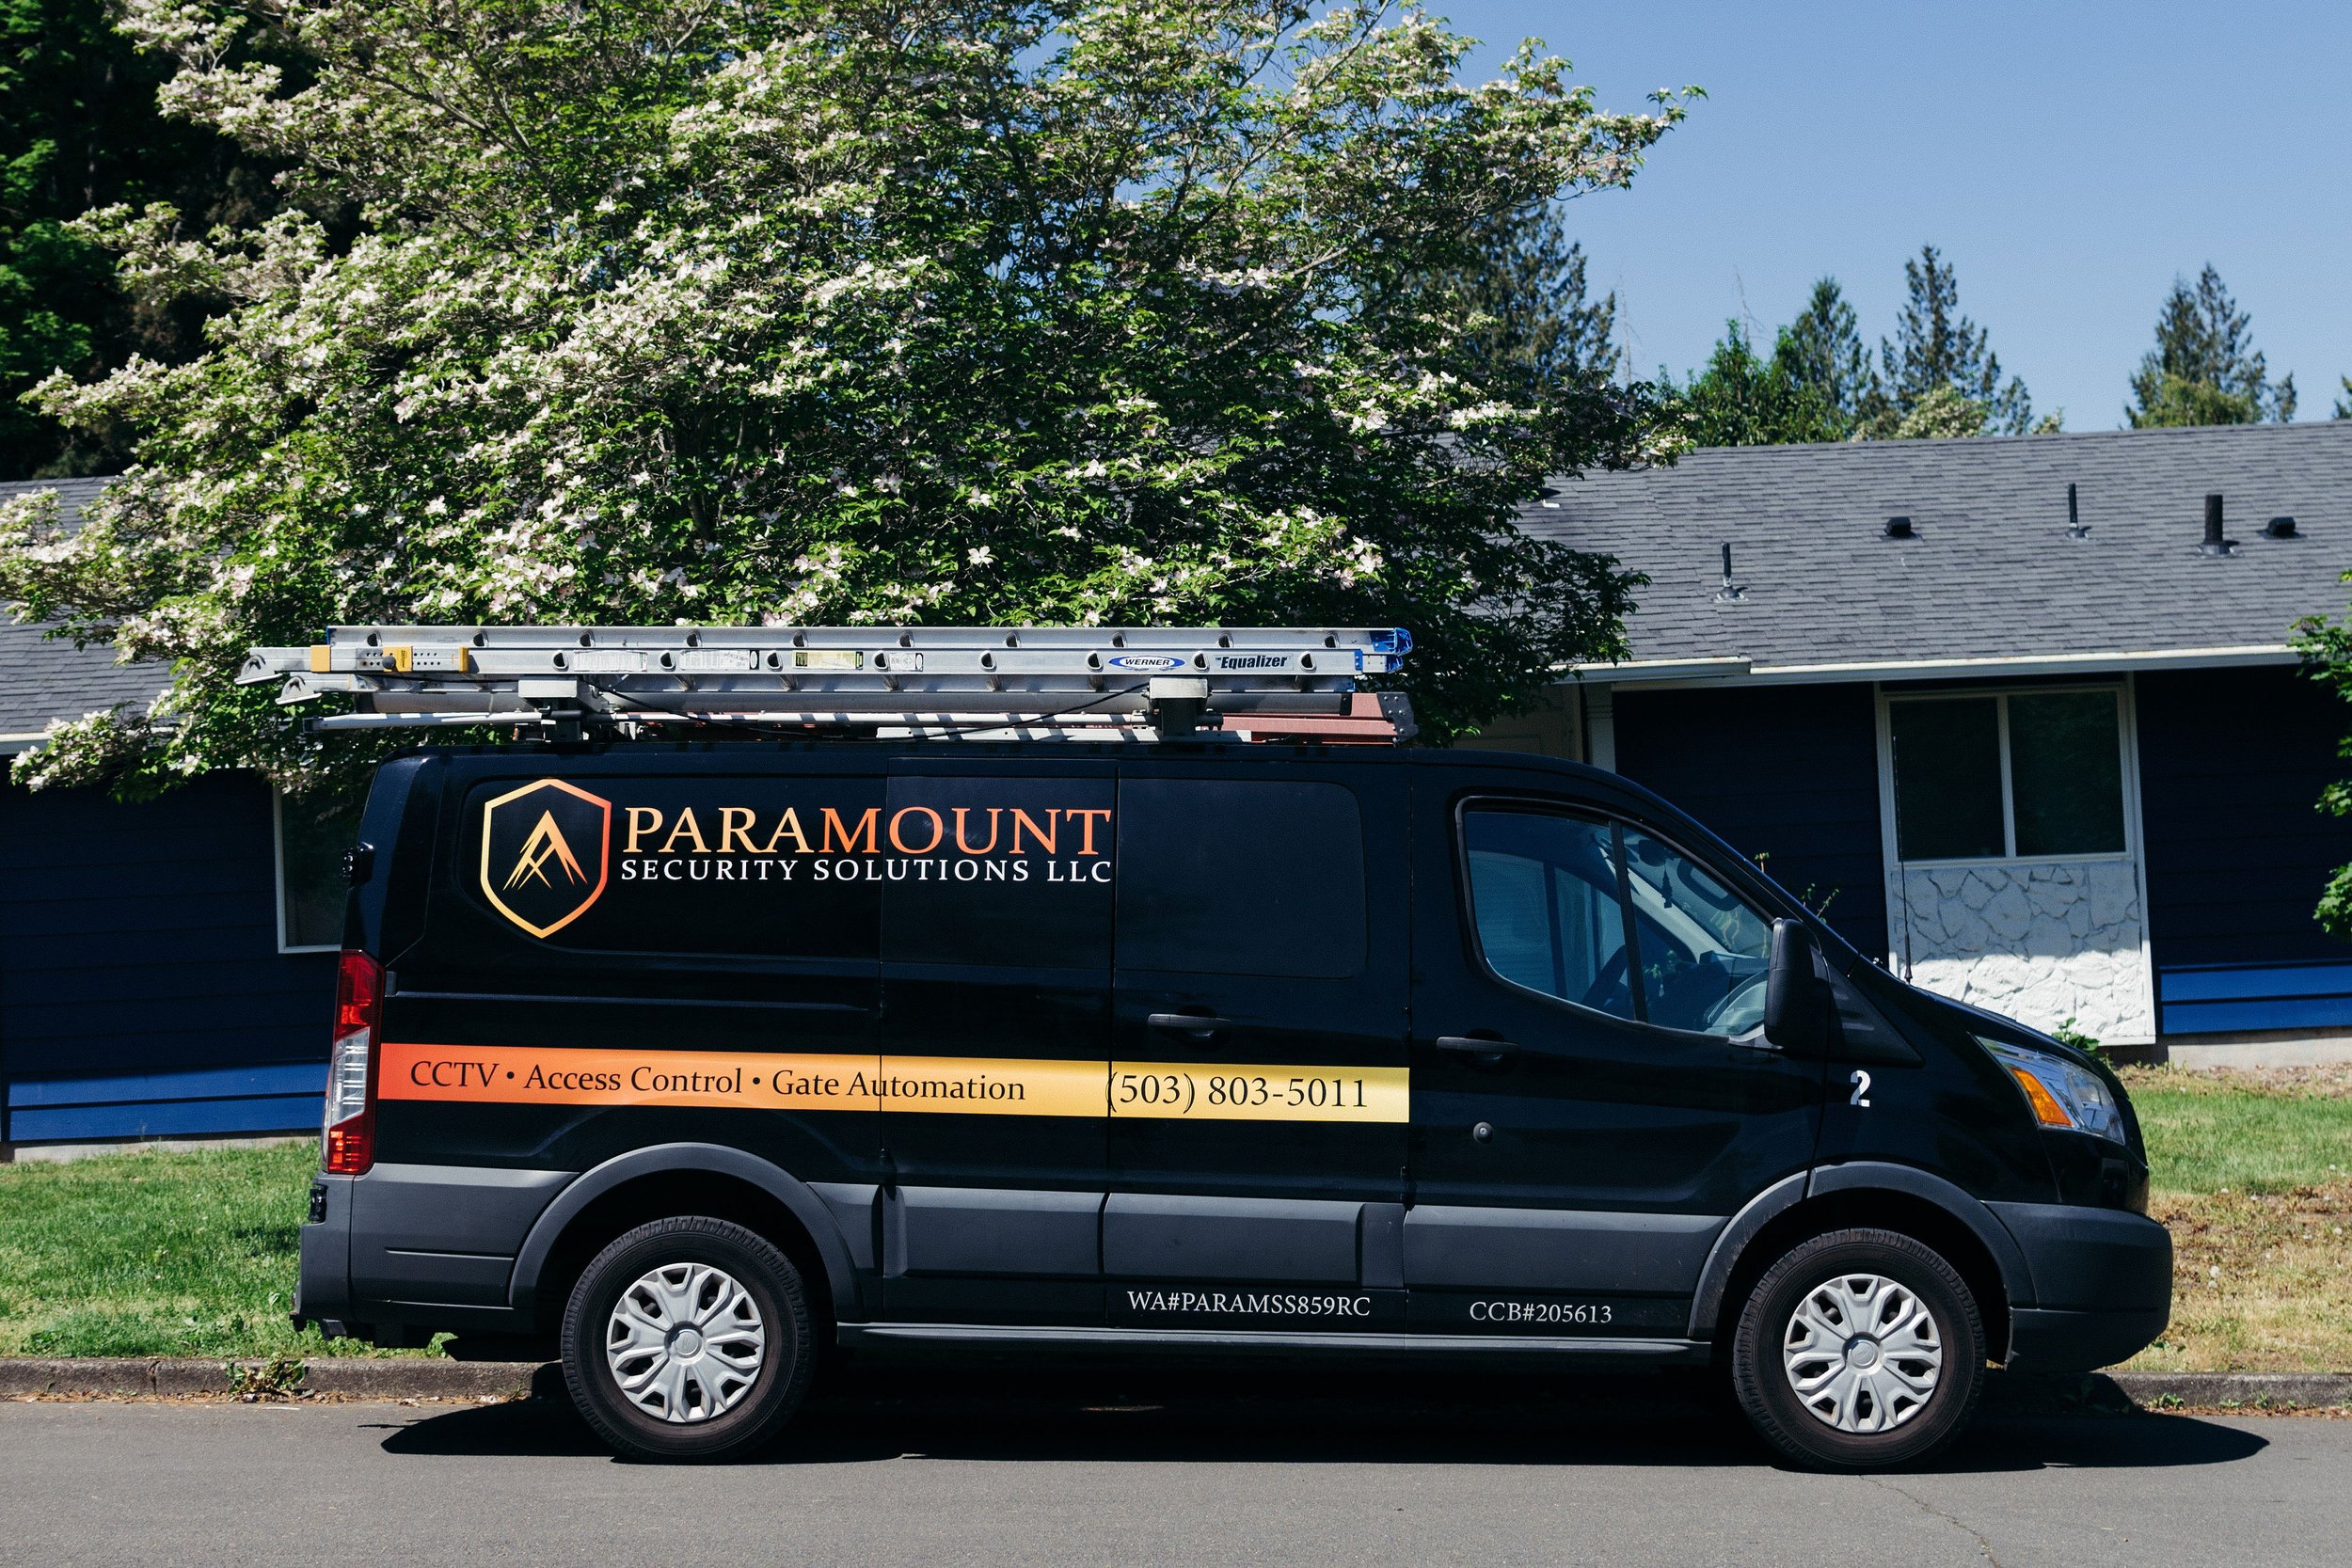 Paramount Security Solutions' van parked in front of a house, captured by brand photographer in Portland, OR